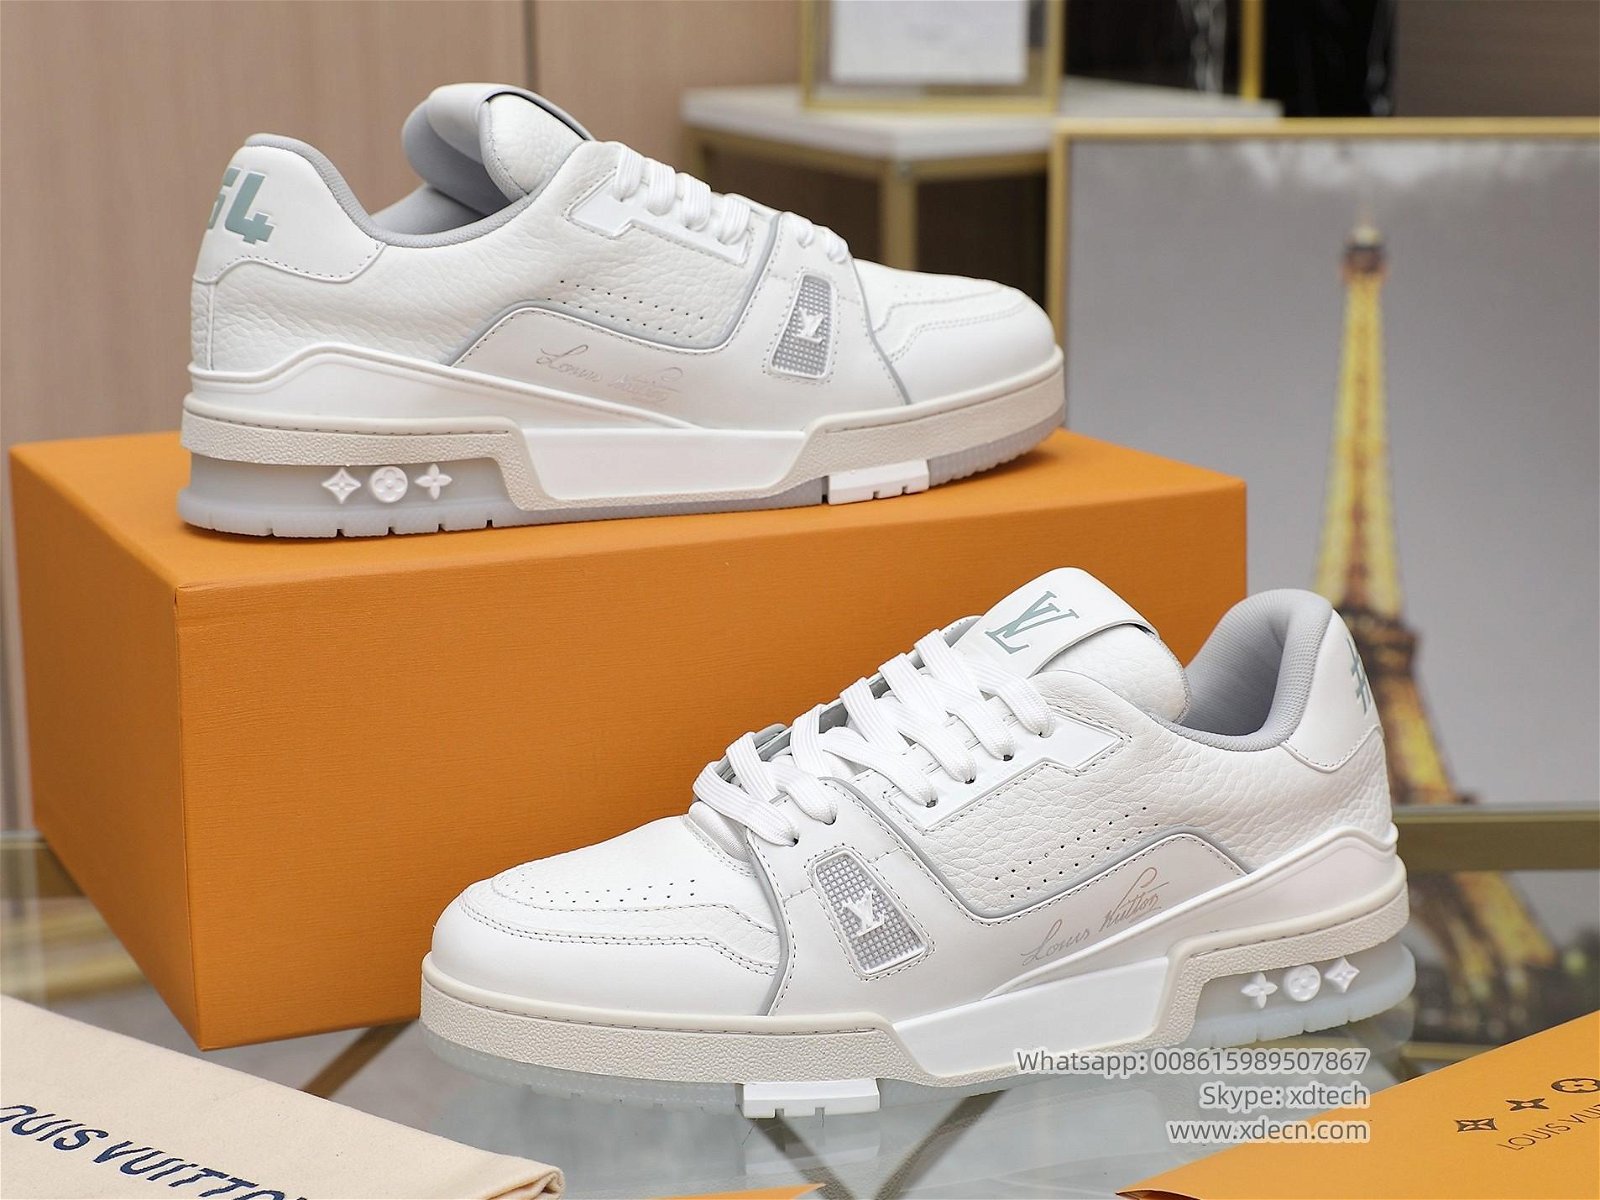               White Sneakers,     atching Shoes 5